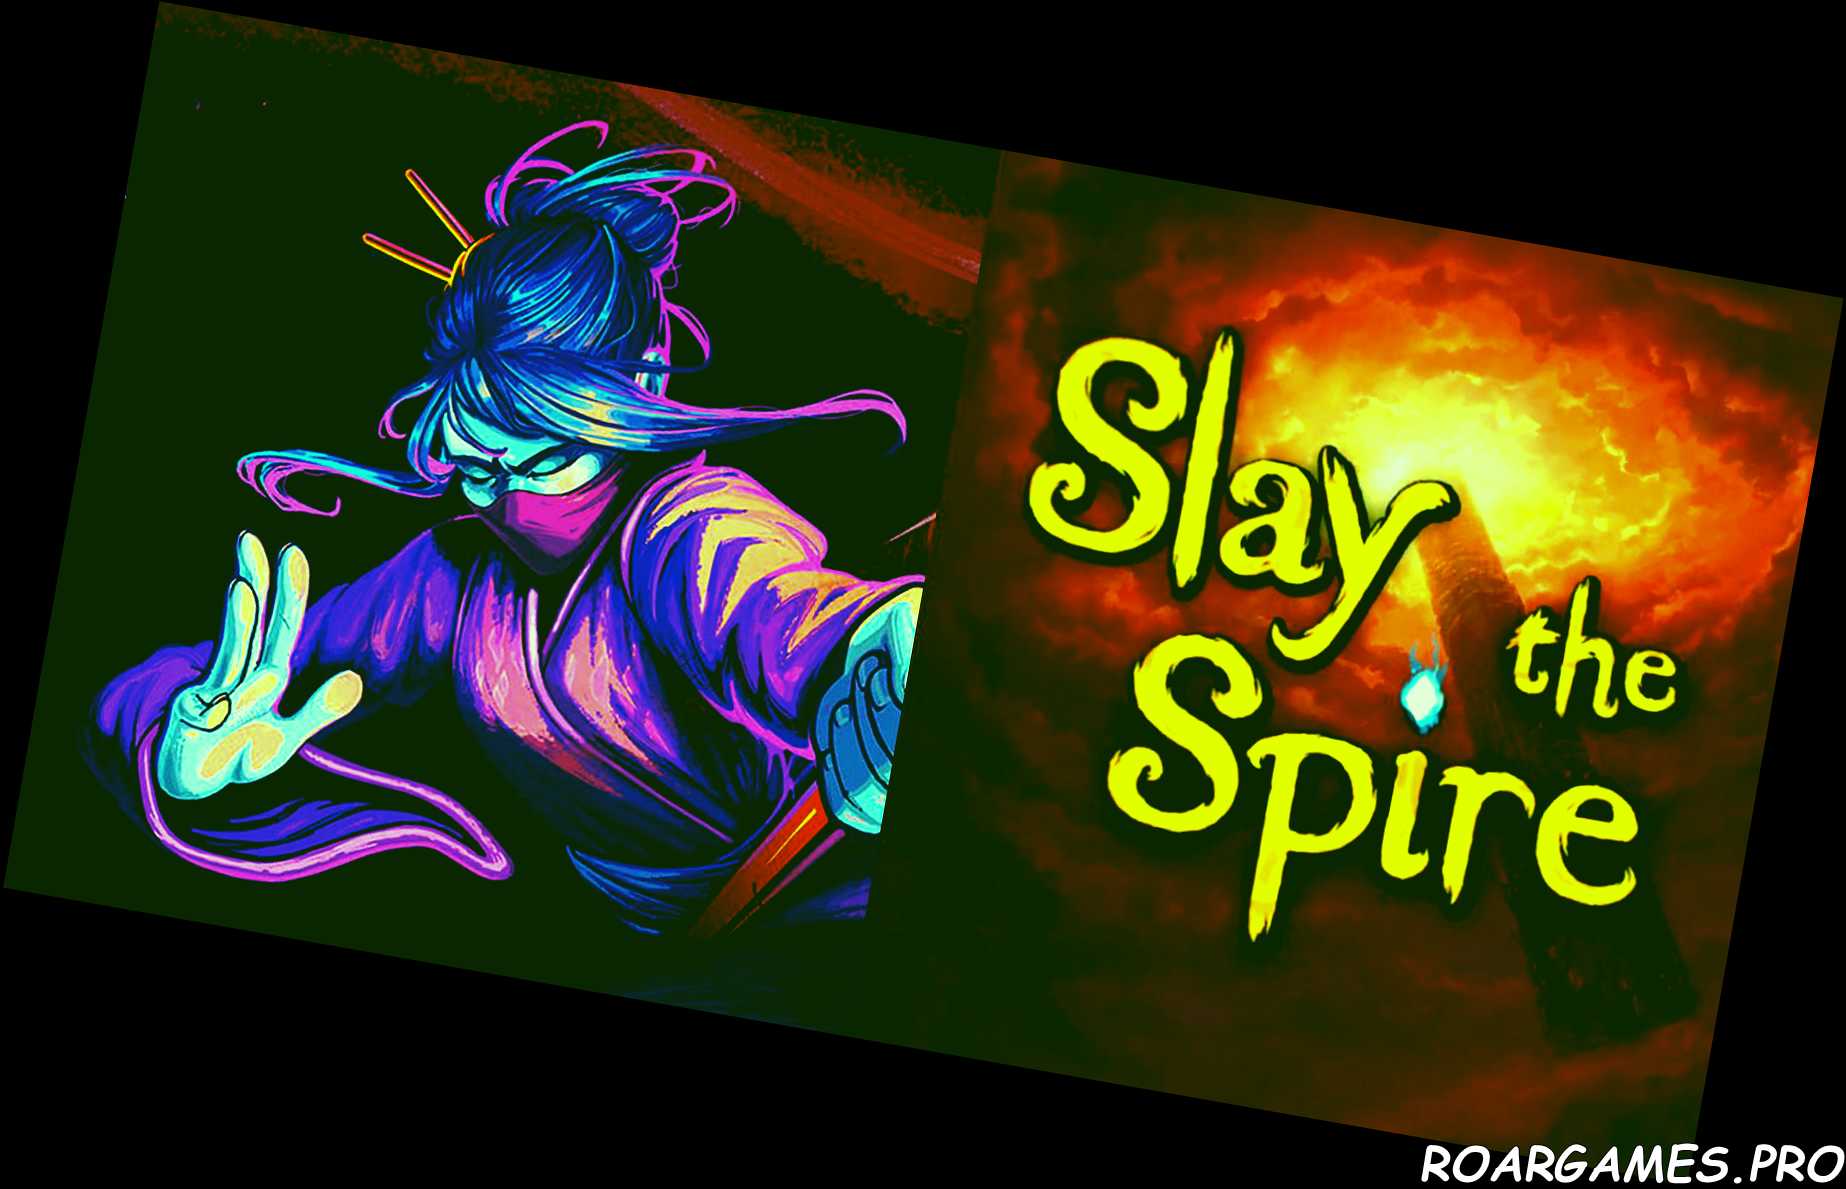 featured slay the spire